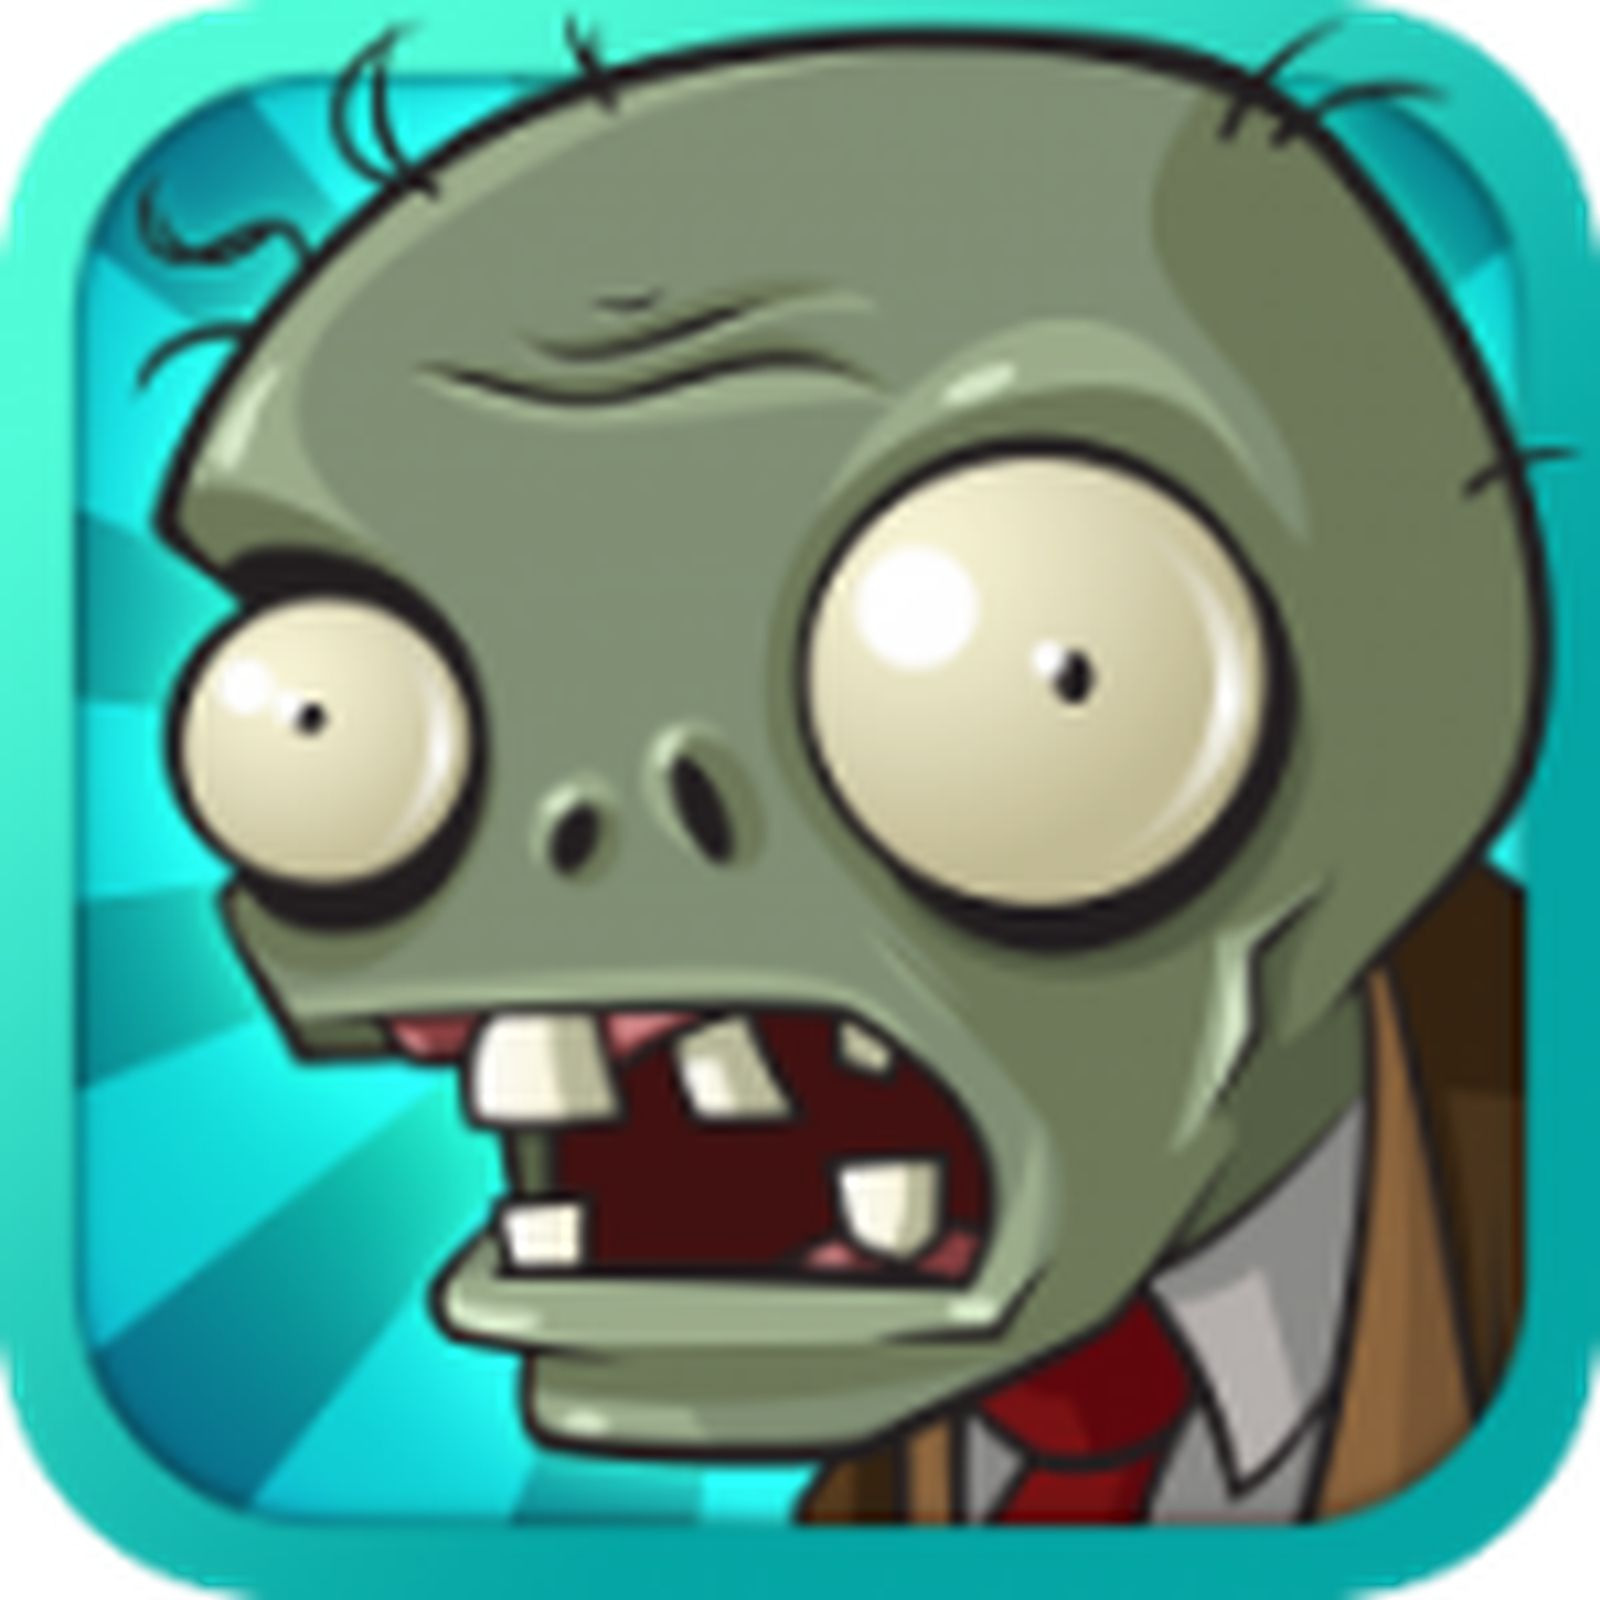 Review – Plants Vs. Zombies 2: It's About Time (iOS/Android